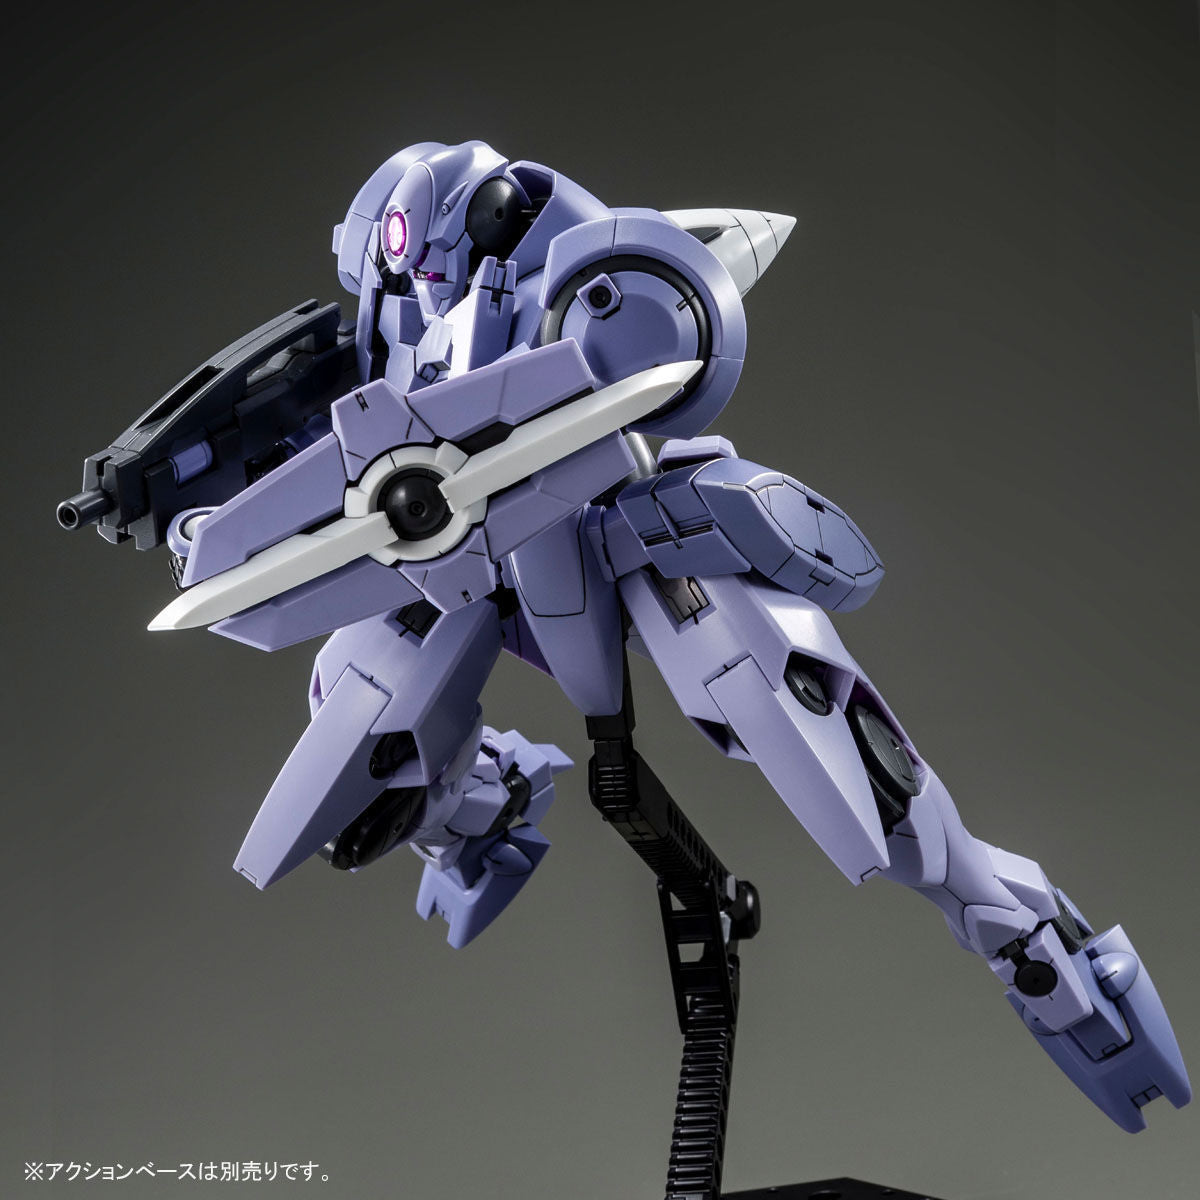 Gundam 1/100 MG GN-X III ESF Colors GNX-609T Premium Bandai Limited Exclusive Model Kit